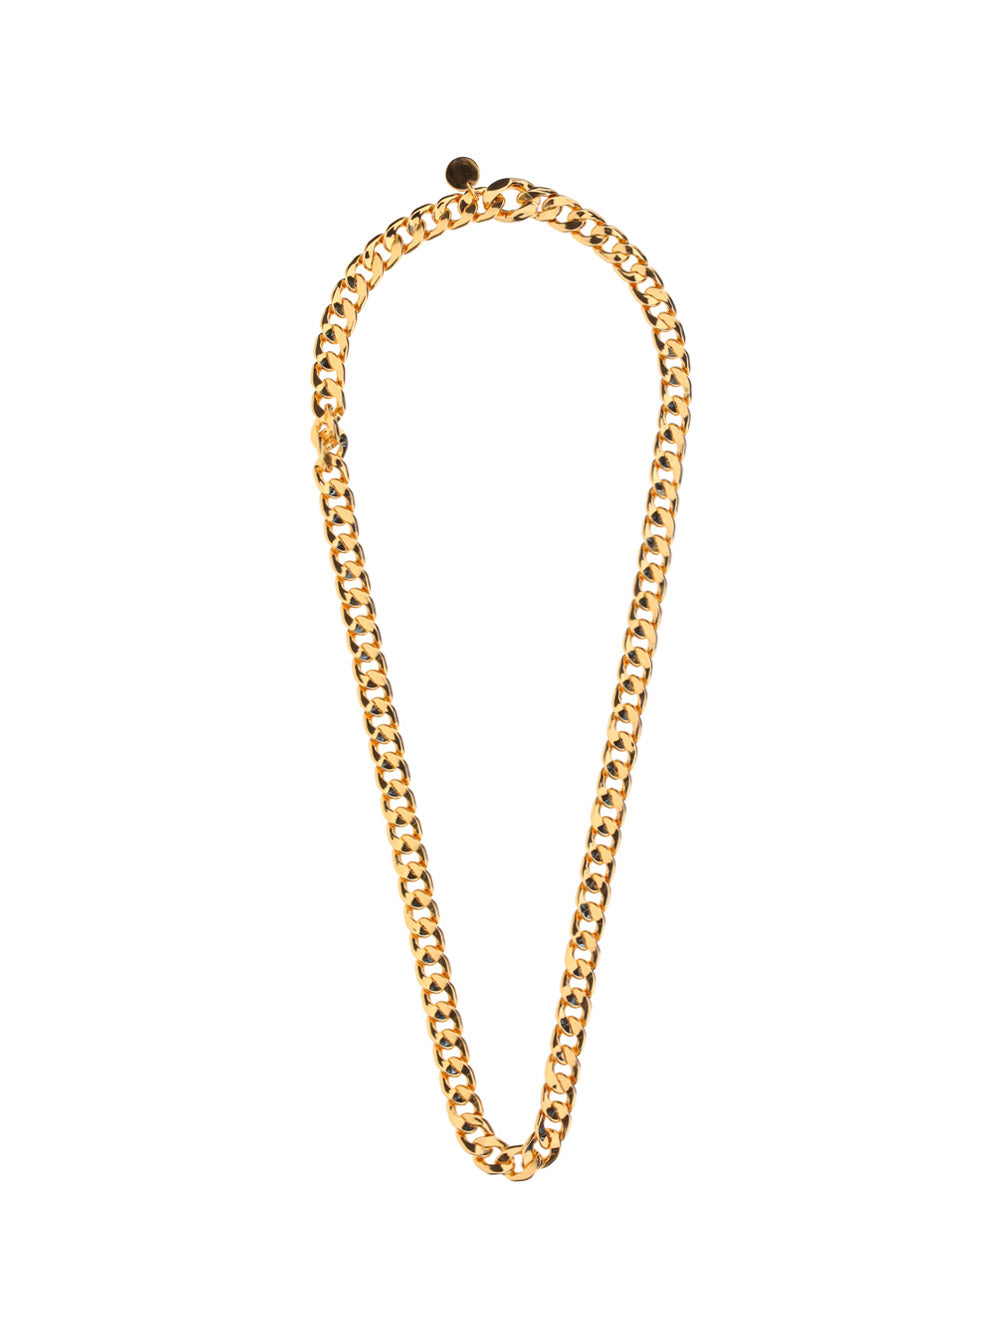 Gold Brass Simple Chain Necklace